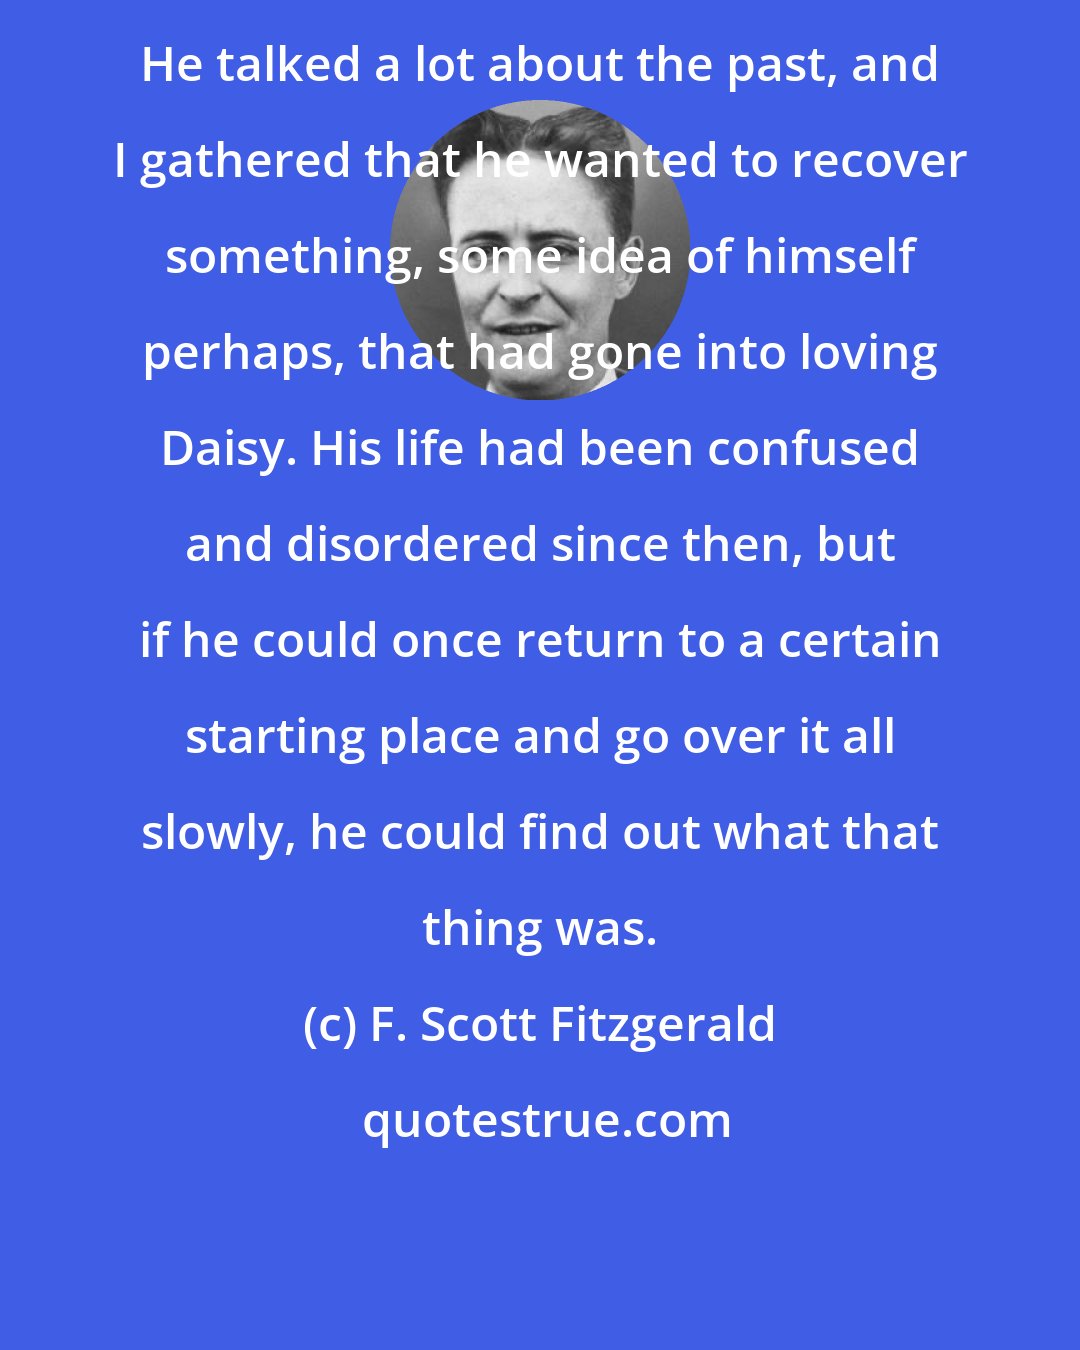 F. Scott Fitzgerald: He talked a lot about the past, and I gathered that he wanted to recover something, some idea of himself perhaps, that had gone into loving Daisy. His life had been confused and disordered since then, but if he could once return to a certain starting place and go over it all slowly, he could find out what that thing was.